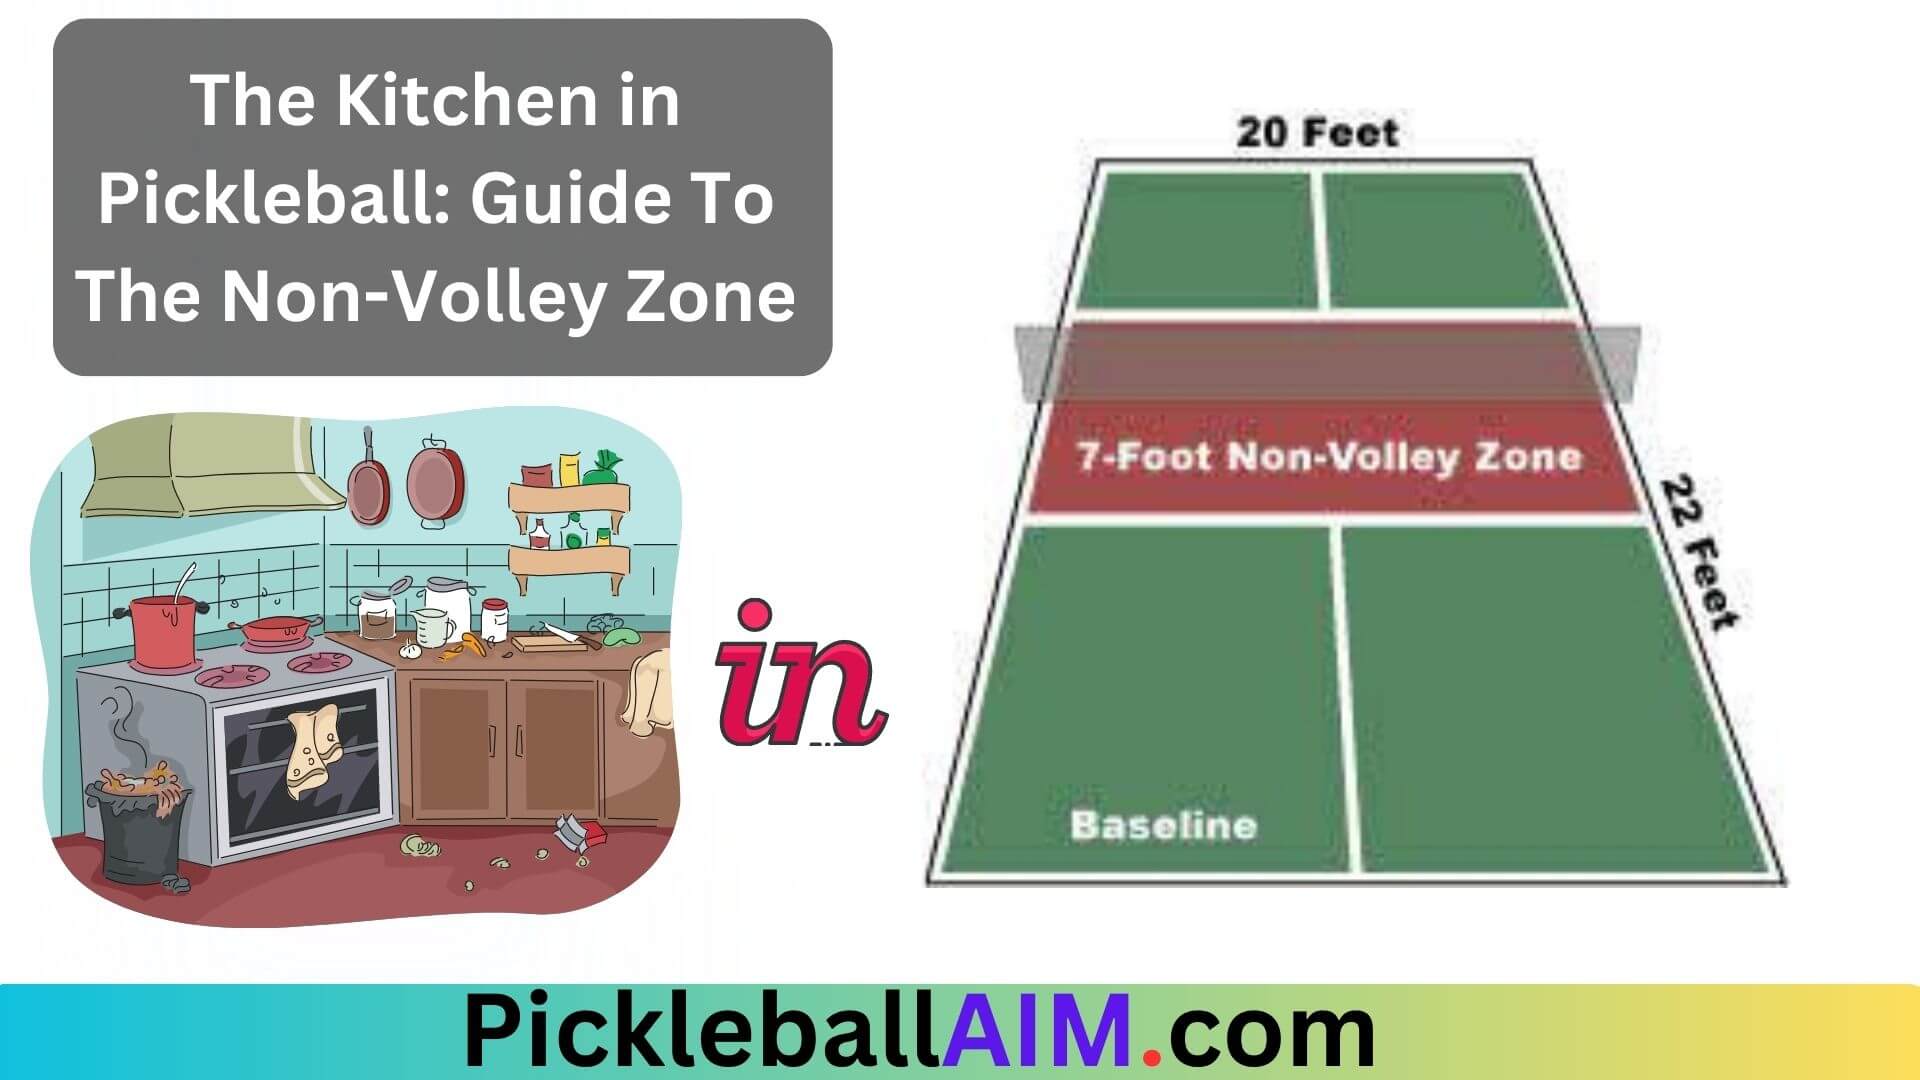 The Kitchen in Pickleball Guide To The Non-Volley Zone